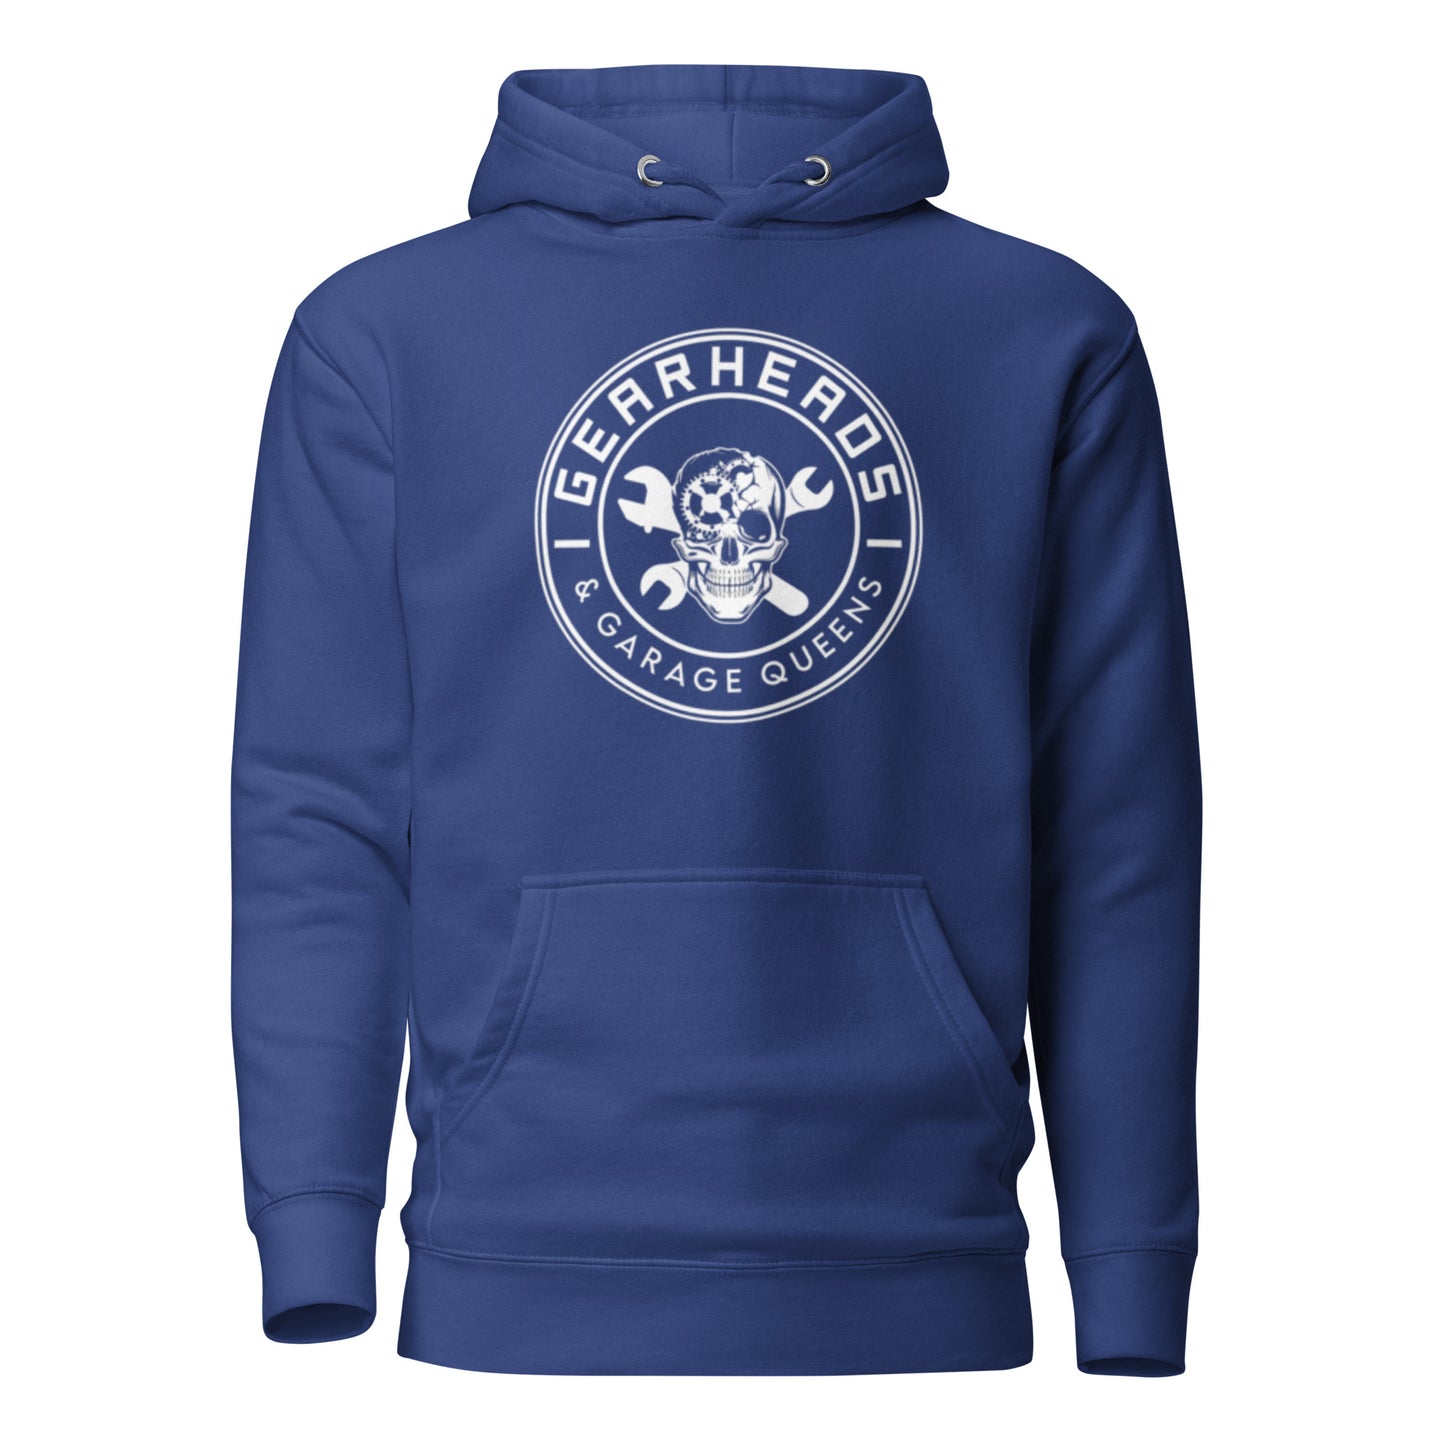 Gearheads and Garage Queens hoodie